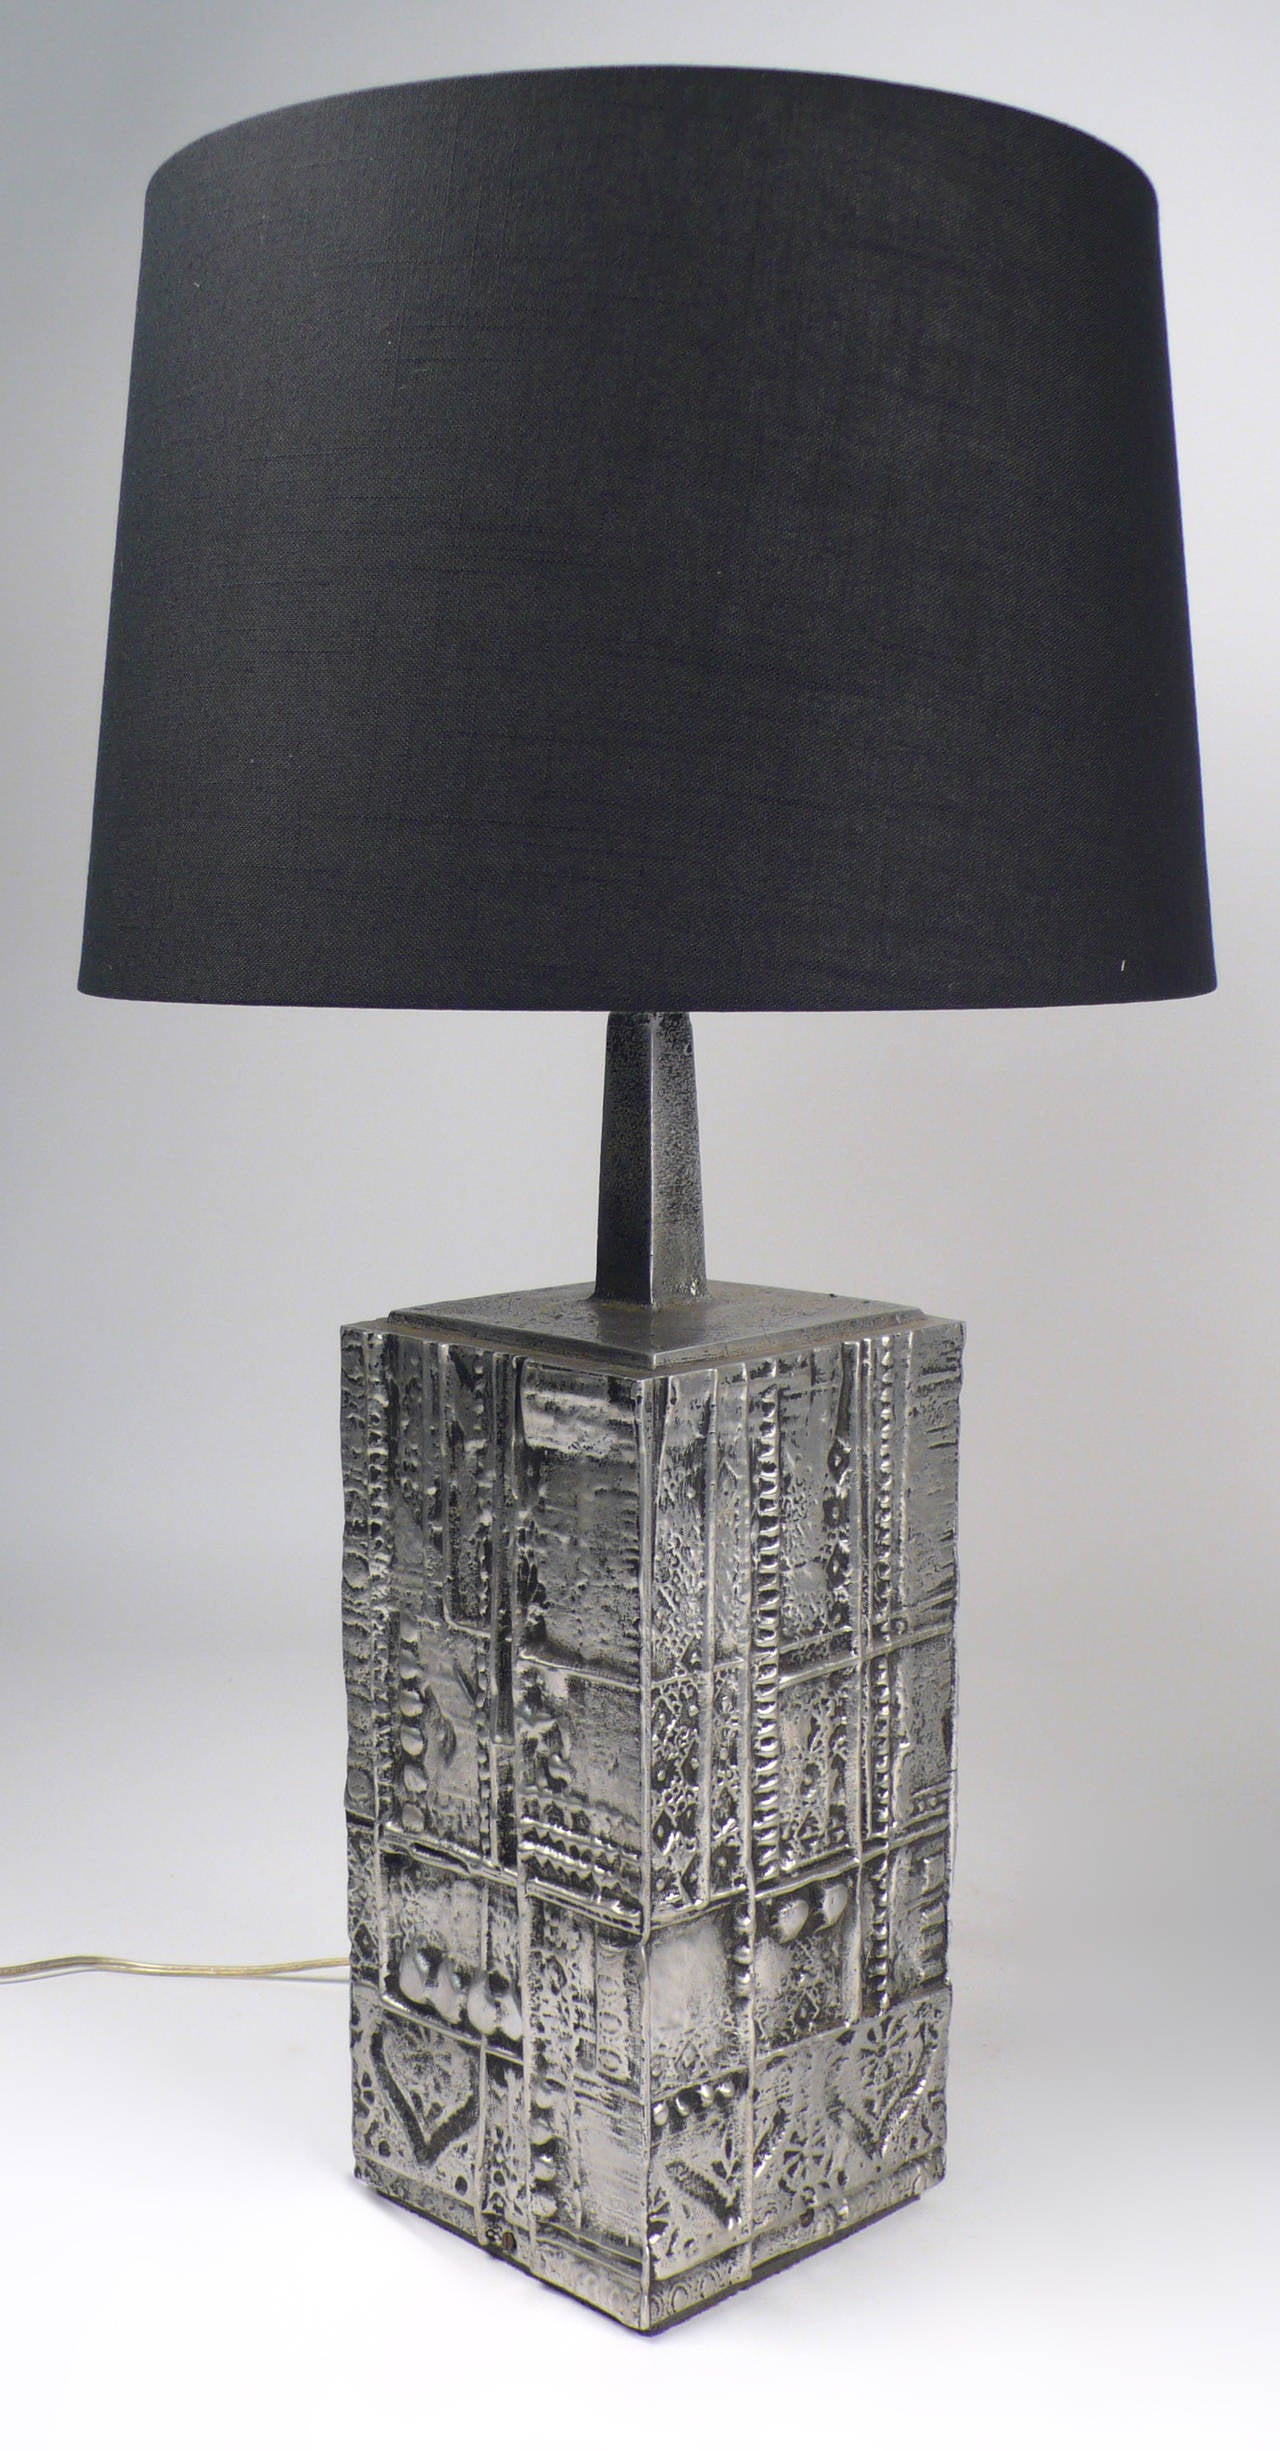 American Lamps by Donald Drumm